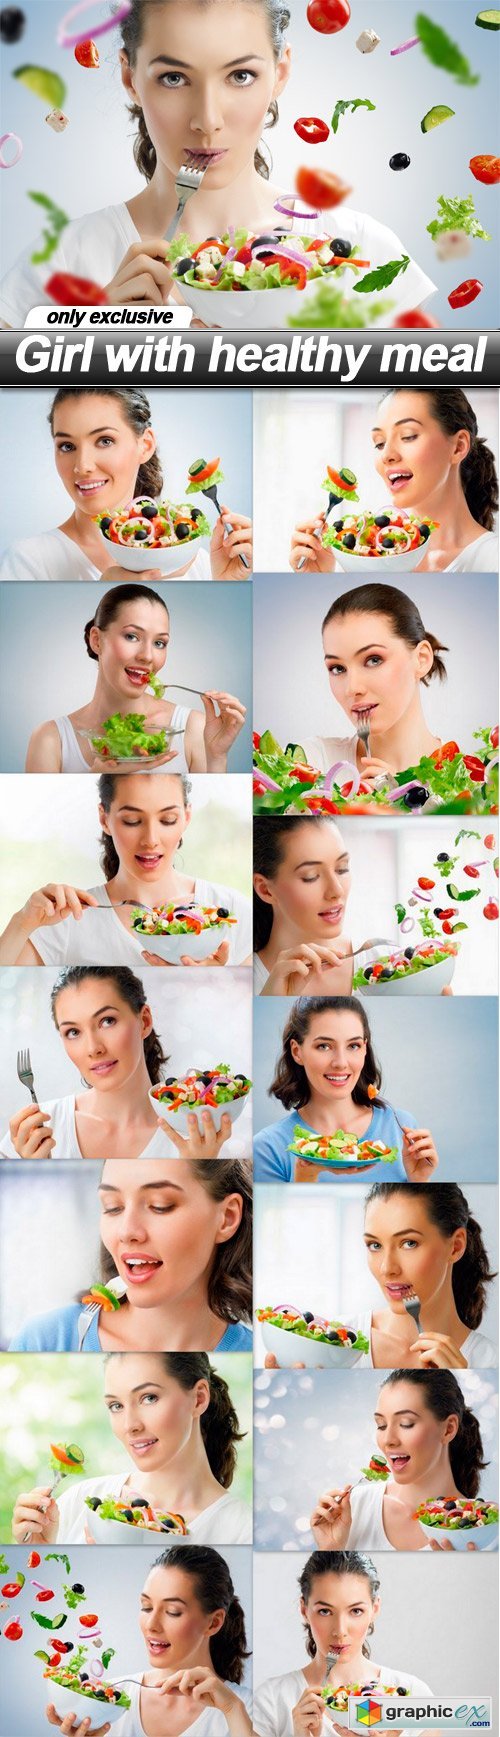 Girl with healthy meal - 15 UHQ JPEG